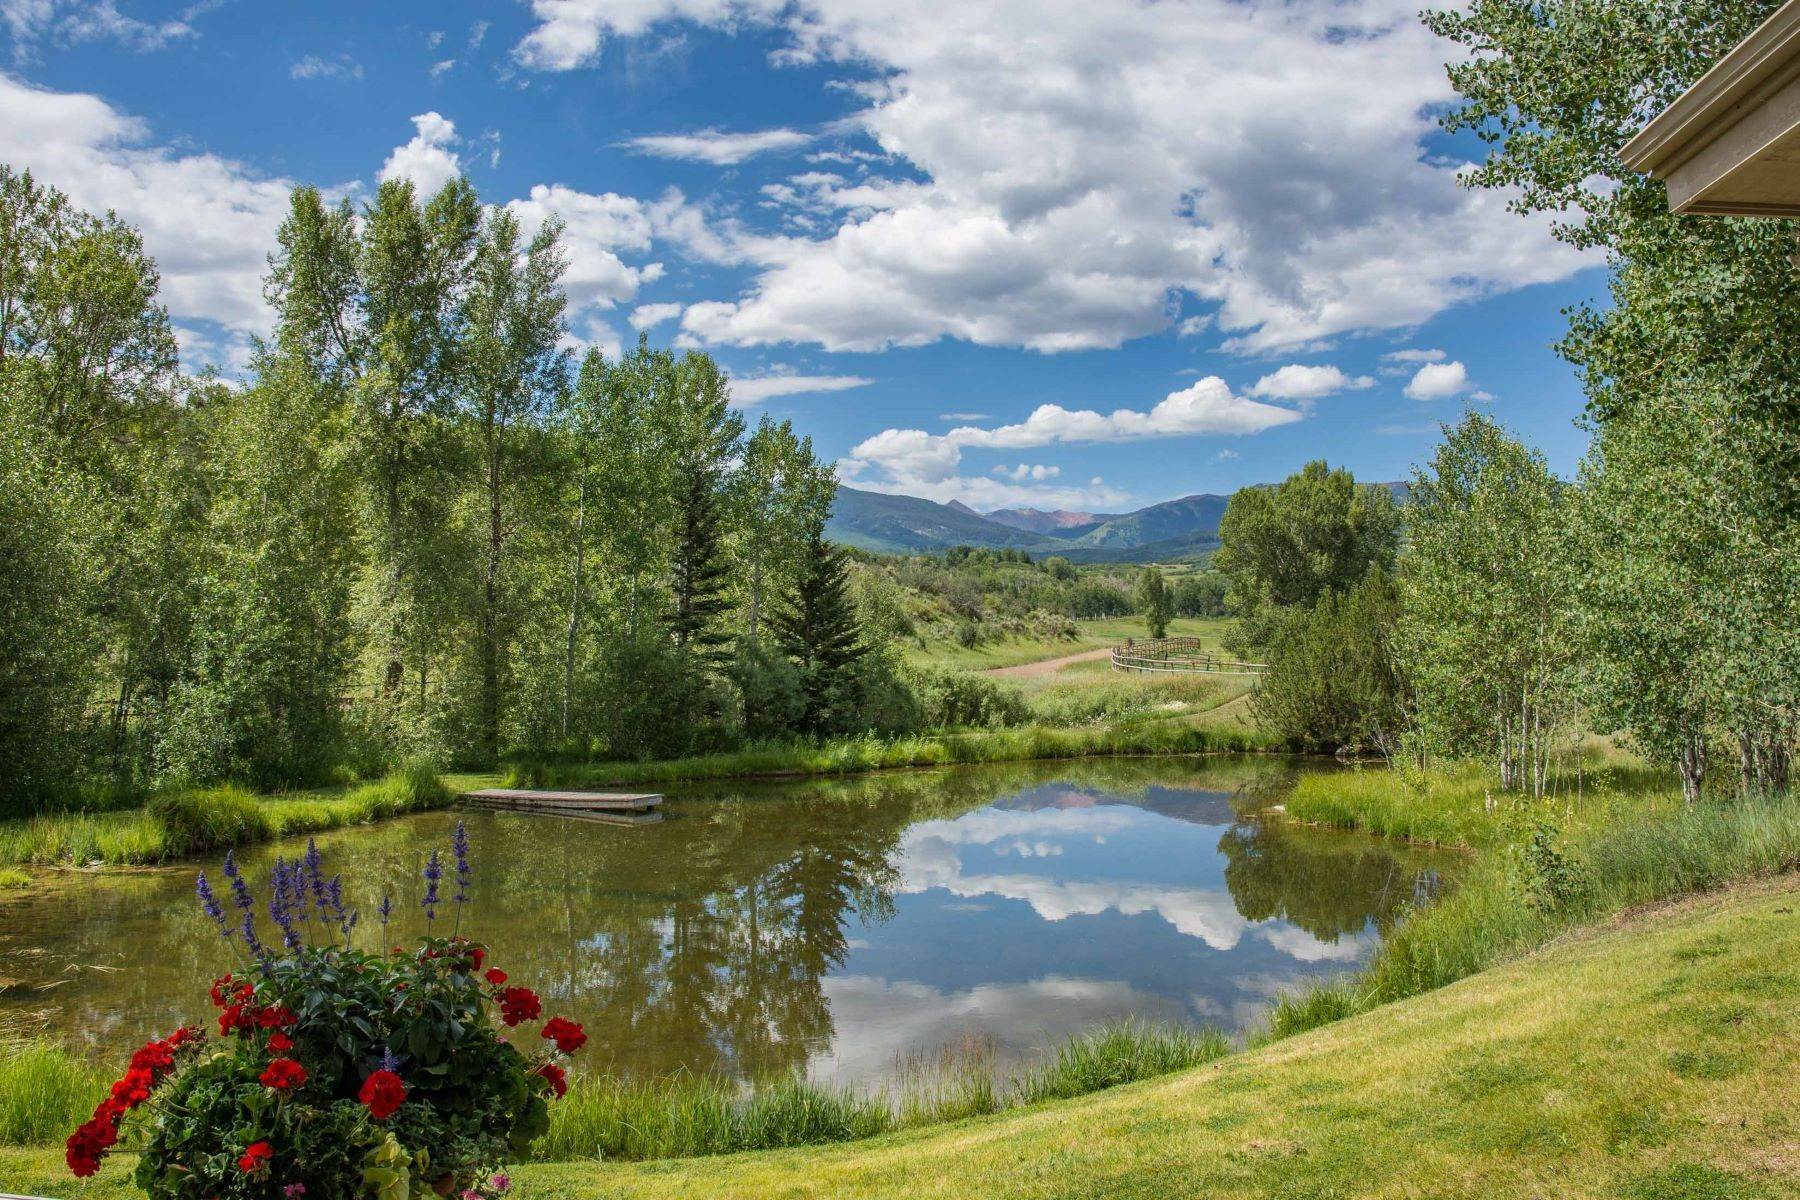 Farm and Ranch Properties for Sale at RARE and UNIQUE opportunity to own the heart of the renowned McCabe Ranch! RARE and UNIQUE opportunity to own the heart of the renowned McCabe Ranch!, Old Snowmass, Colorado 81654 United States